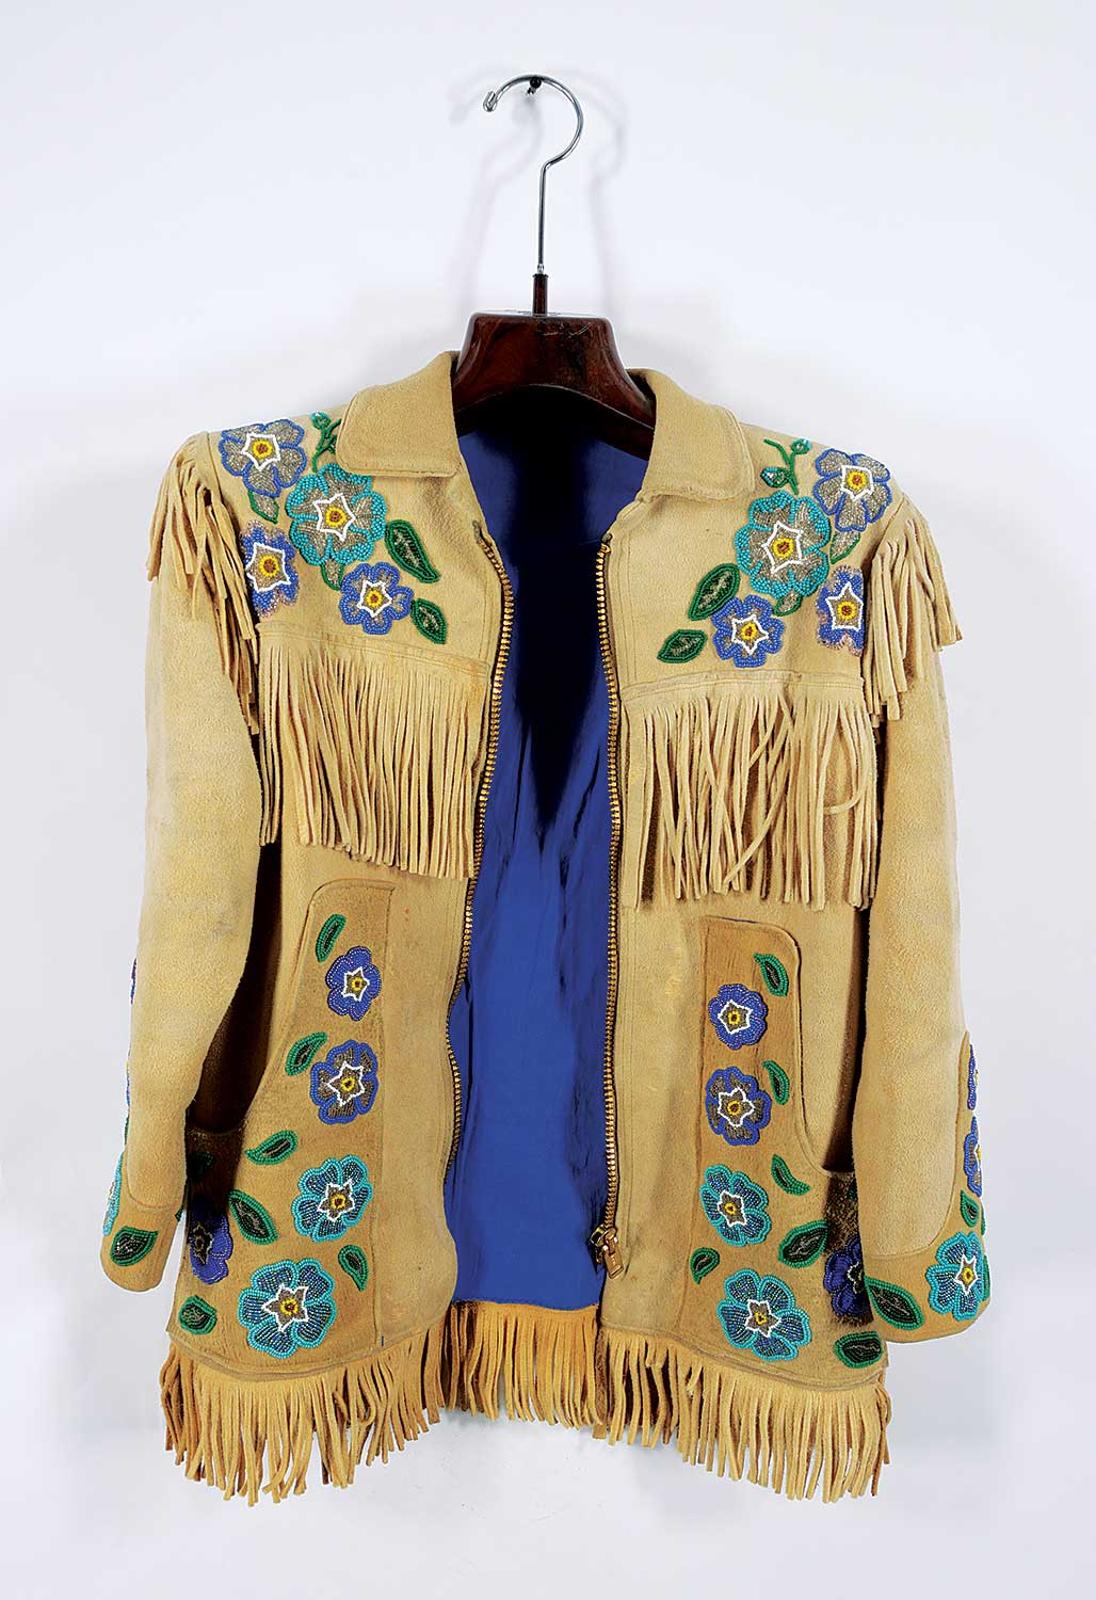 First Nations Basket School - Buckskin Jacket with Very Ornate Beads